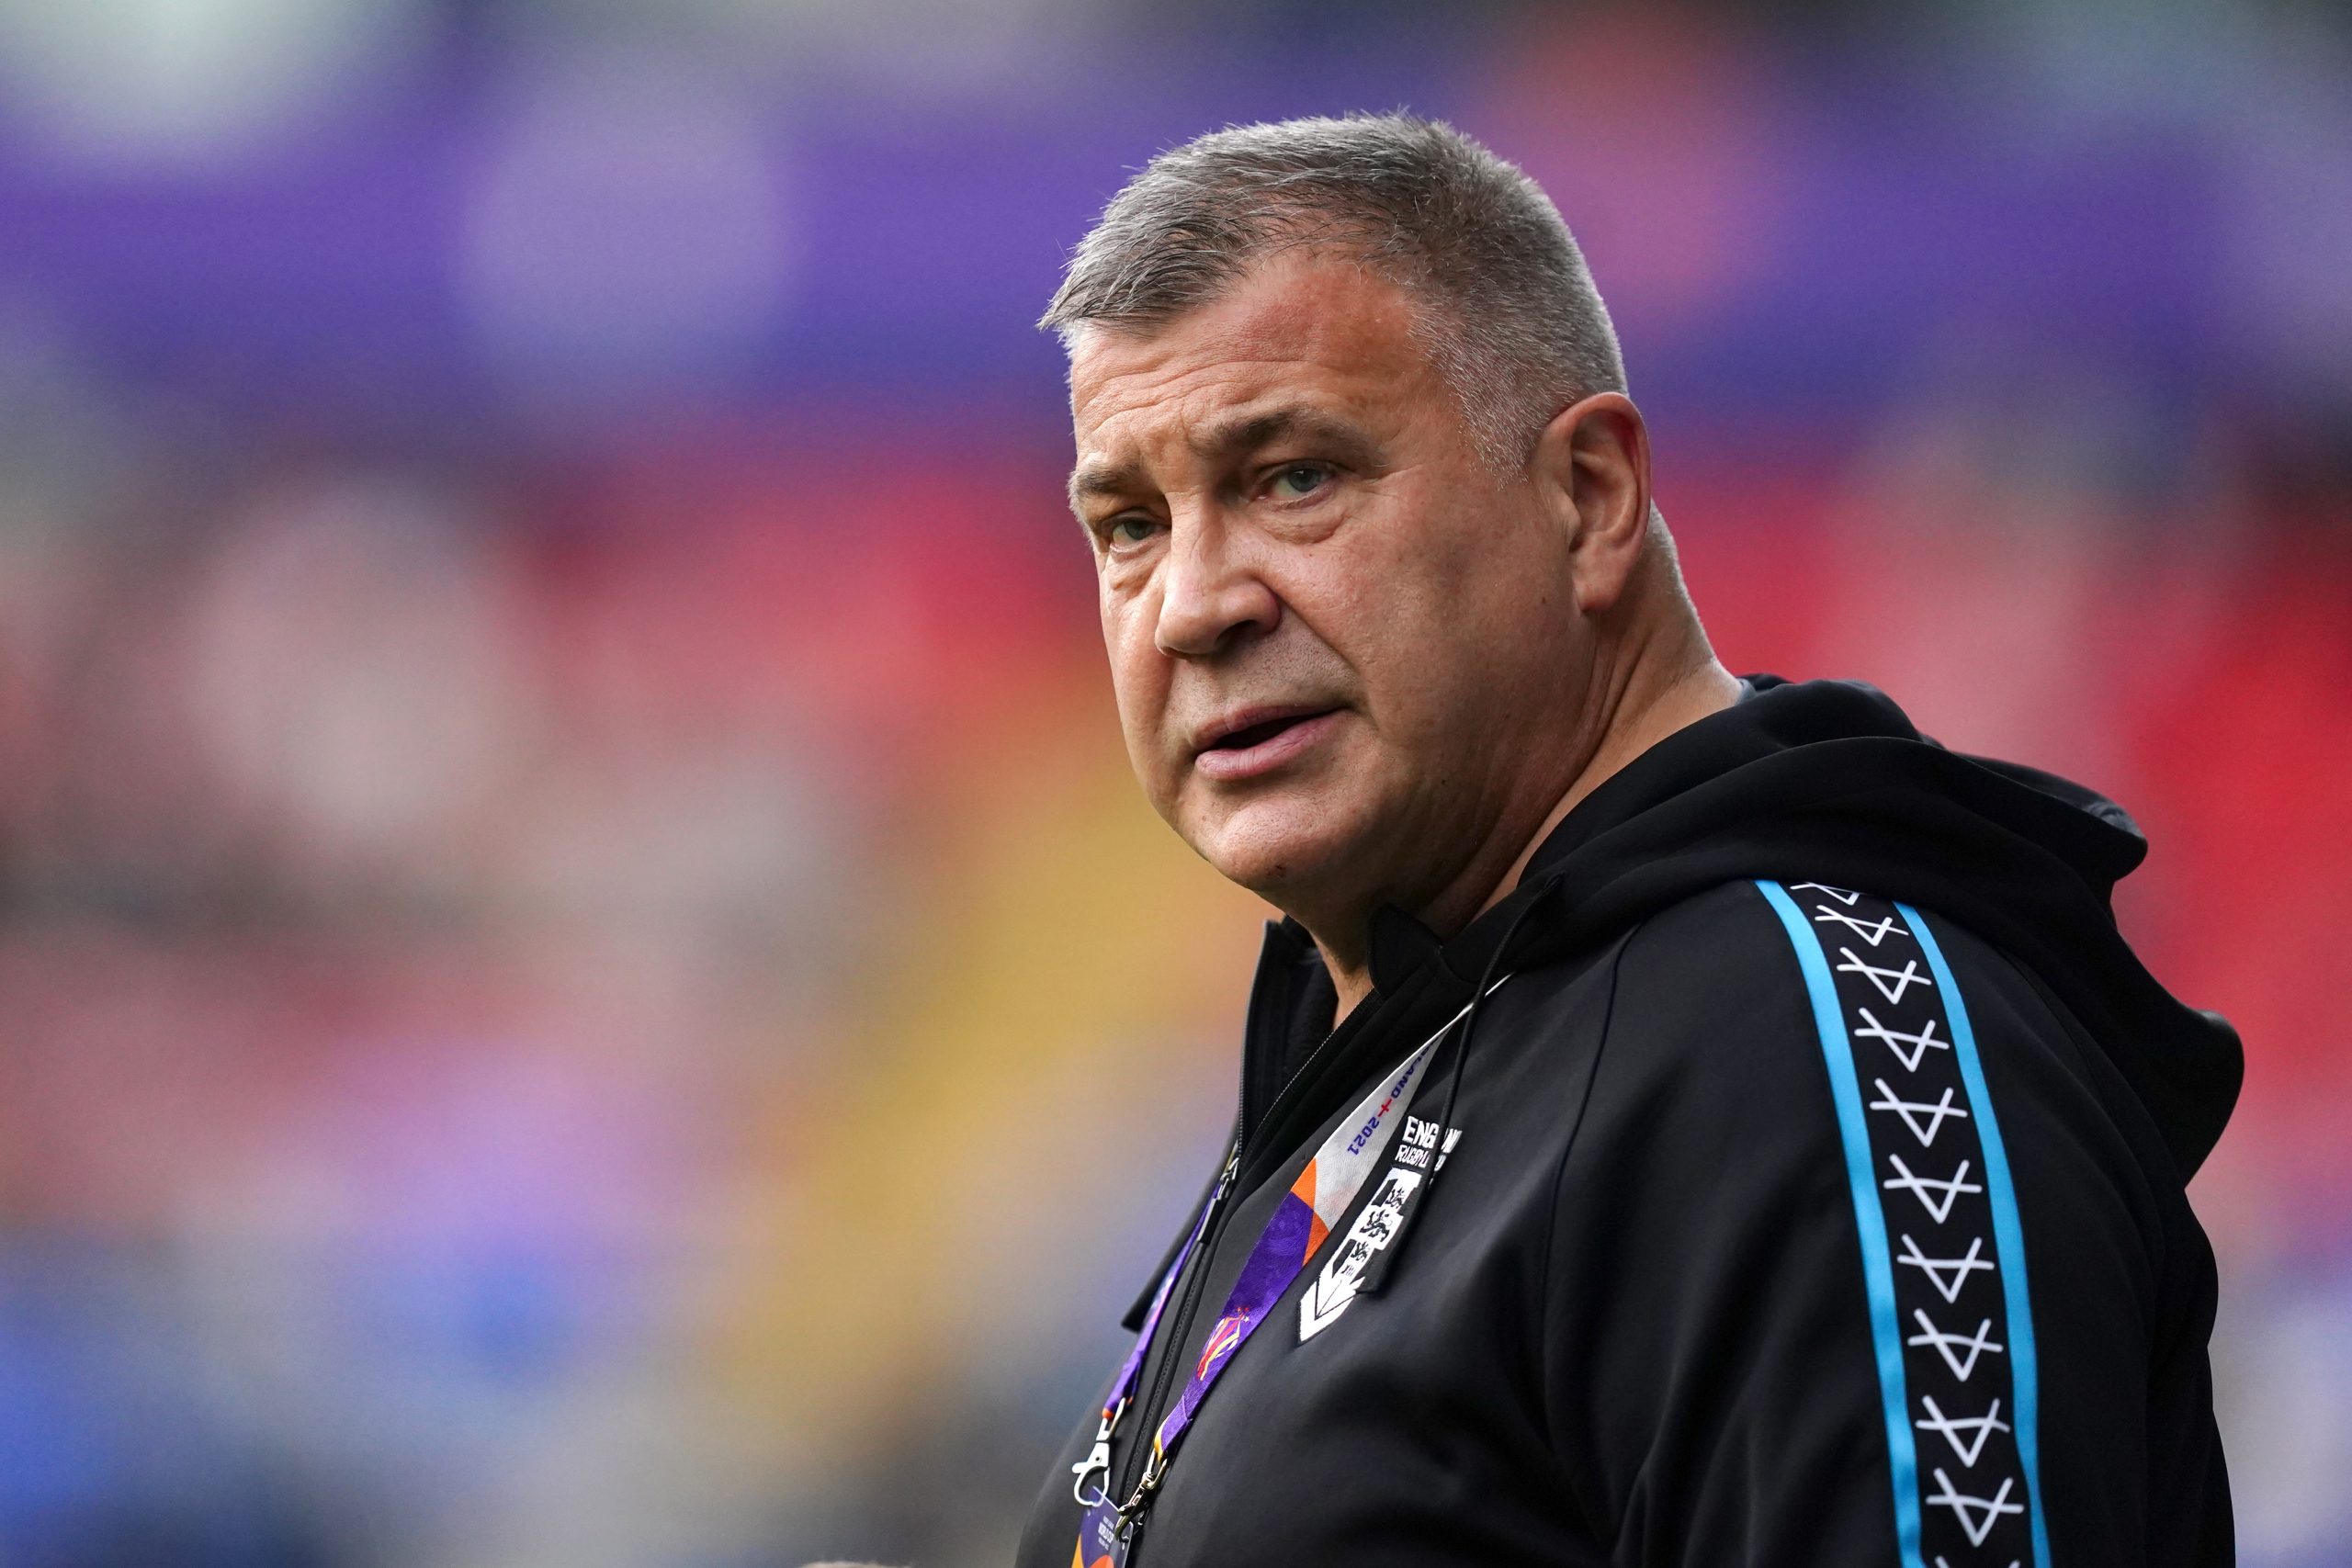 Shaun Wane insists World Cup is not rigged in England’s favour